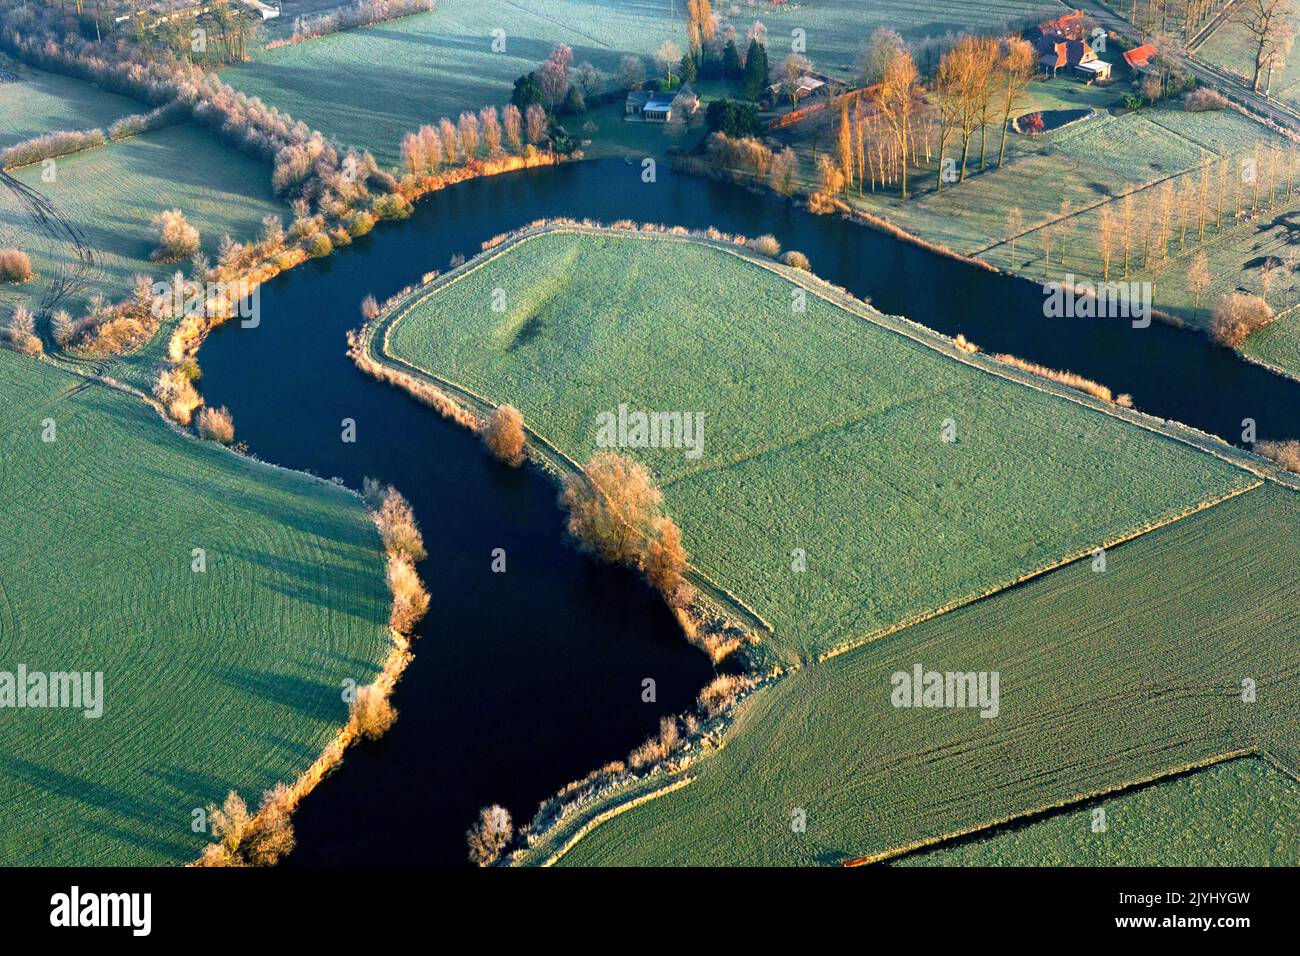 Vosselare put, old river branch of the Leie, aerial view, Belgium, Flanders Stock Photo